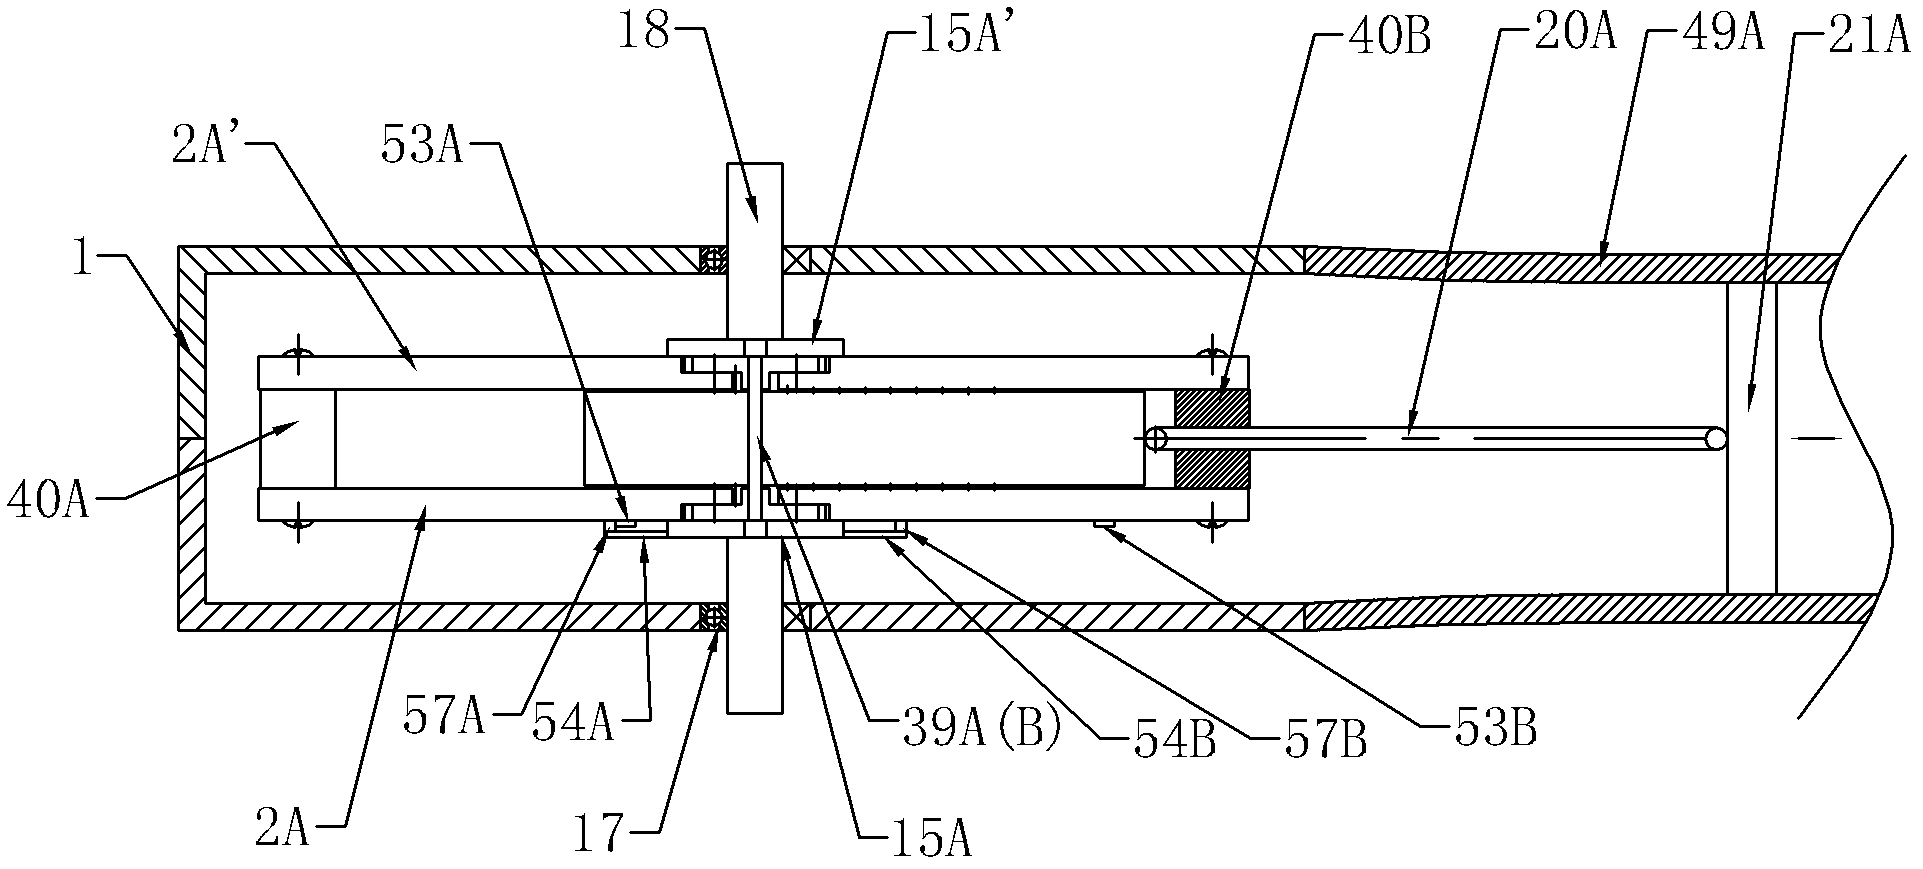 Gear-tooth block meshing switching device for linear reciprocating motion and rotational motion